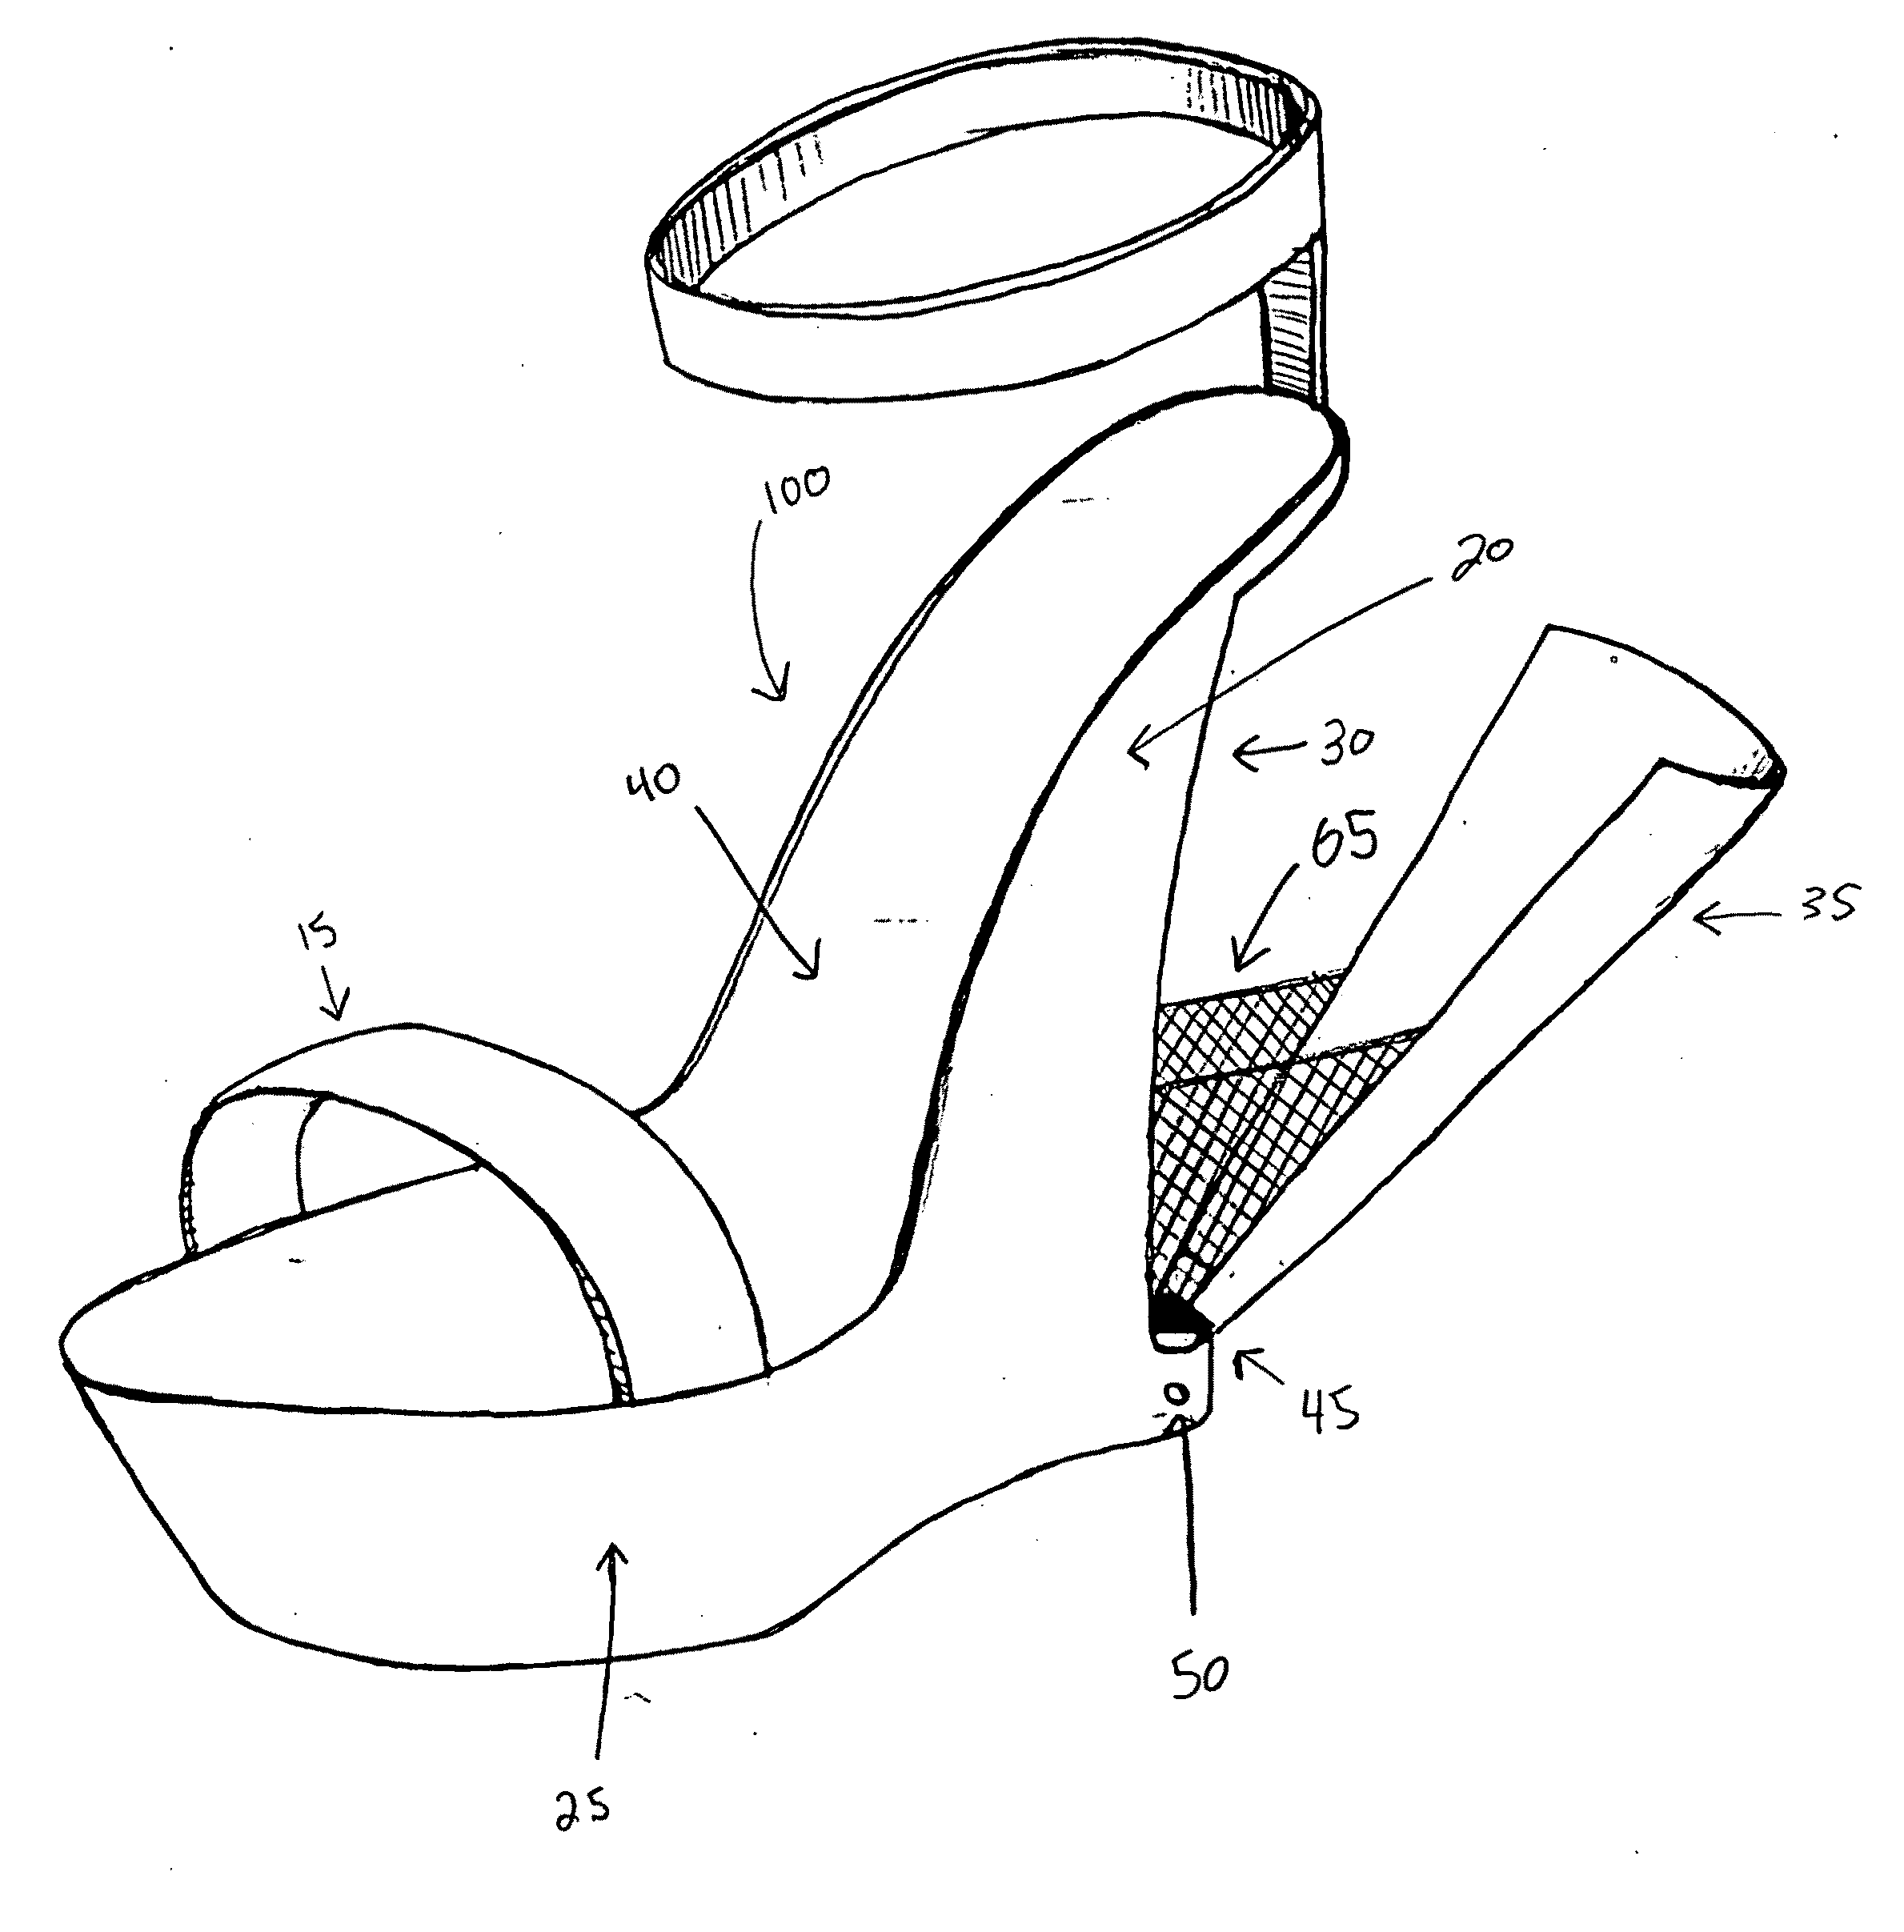 Shoe With Concealed, Heel Storage Compartment